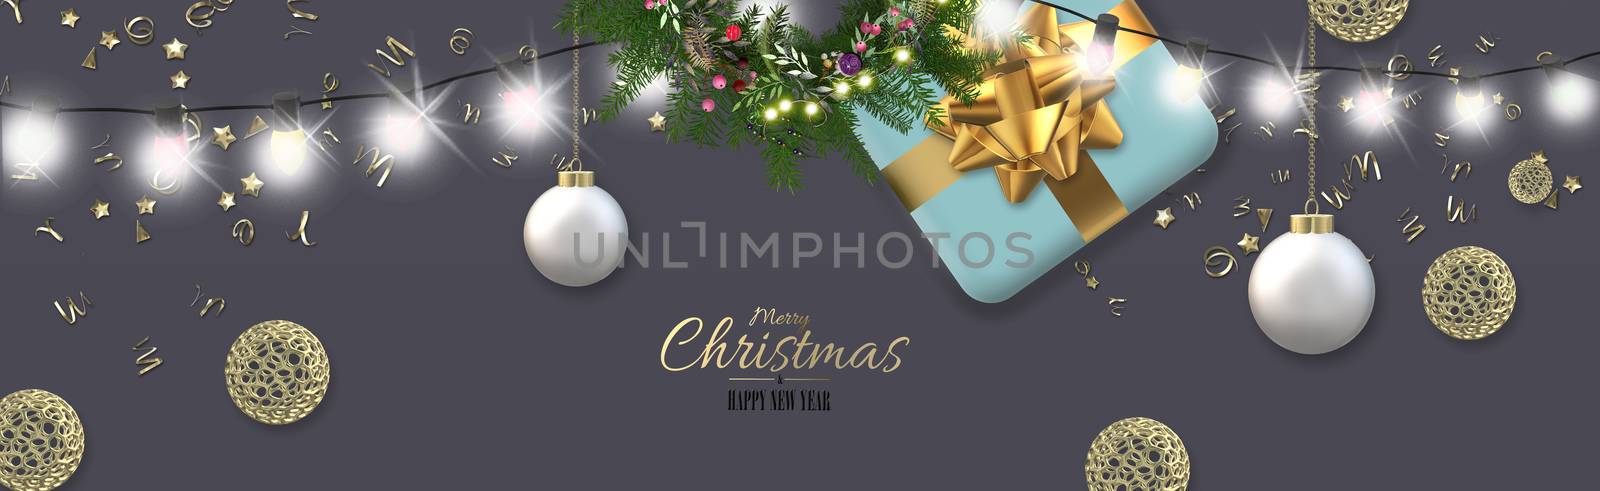 Christmas holiday ornament with Xmas gift box, 3D Xmas balls, gold ornament on pastel dark black background. 3D render. Festive horizontal banner for card, invitation, banner. Place for text.